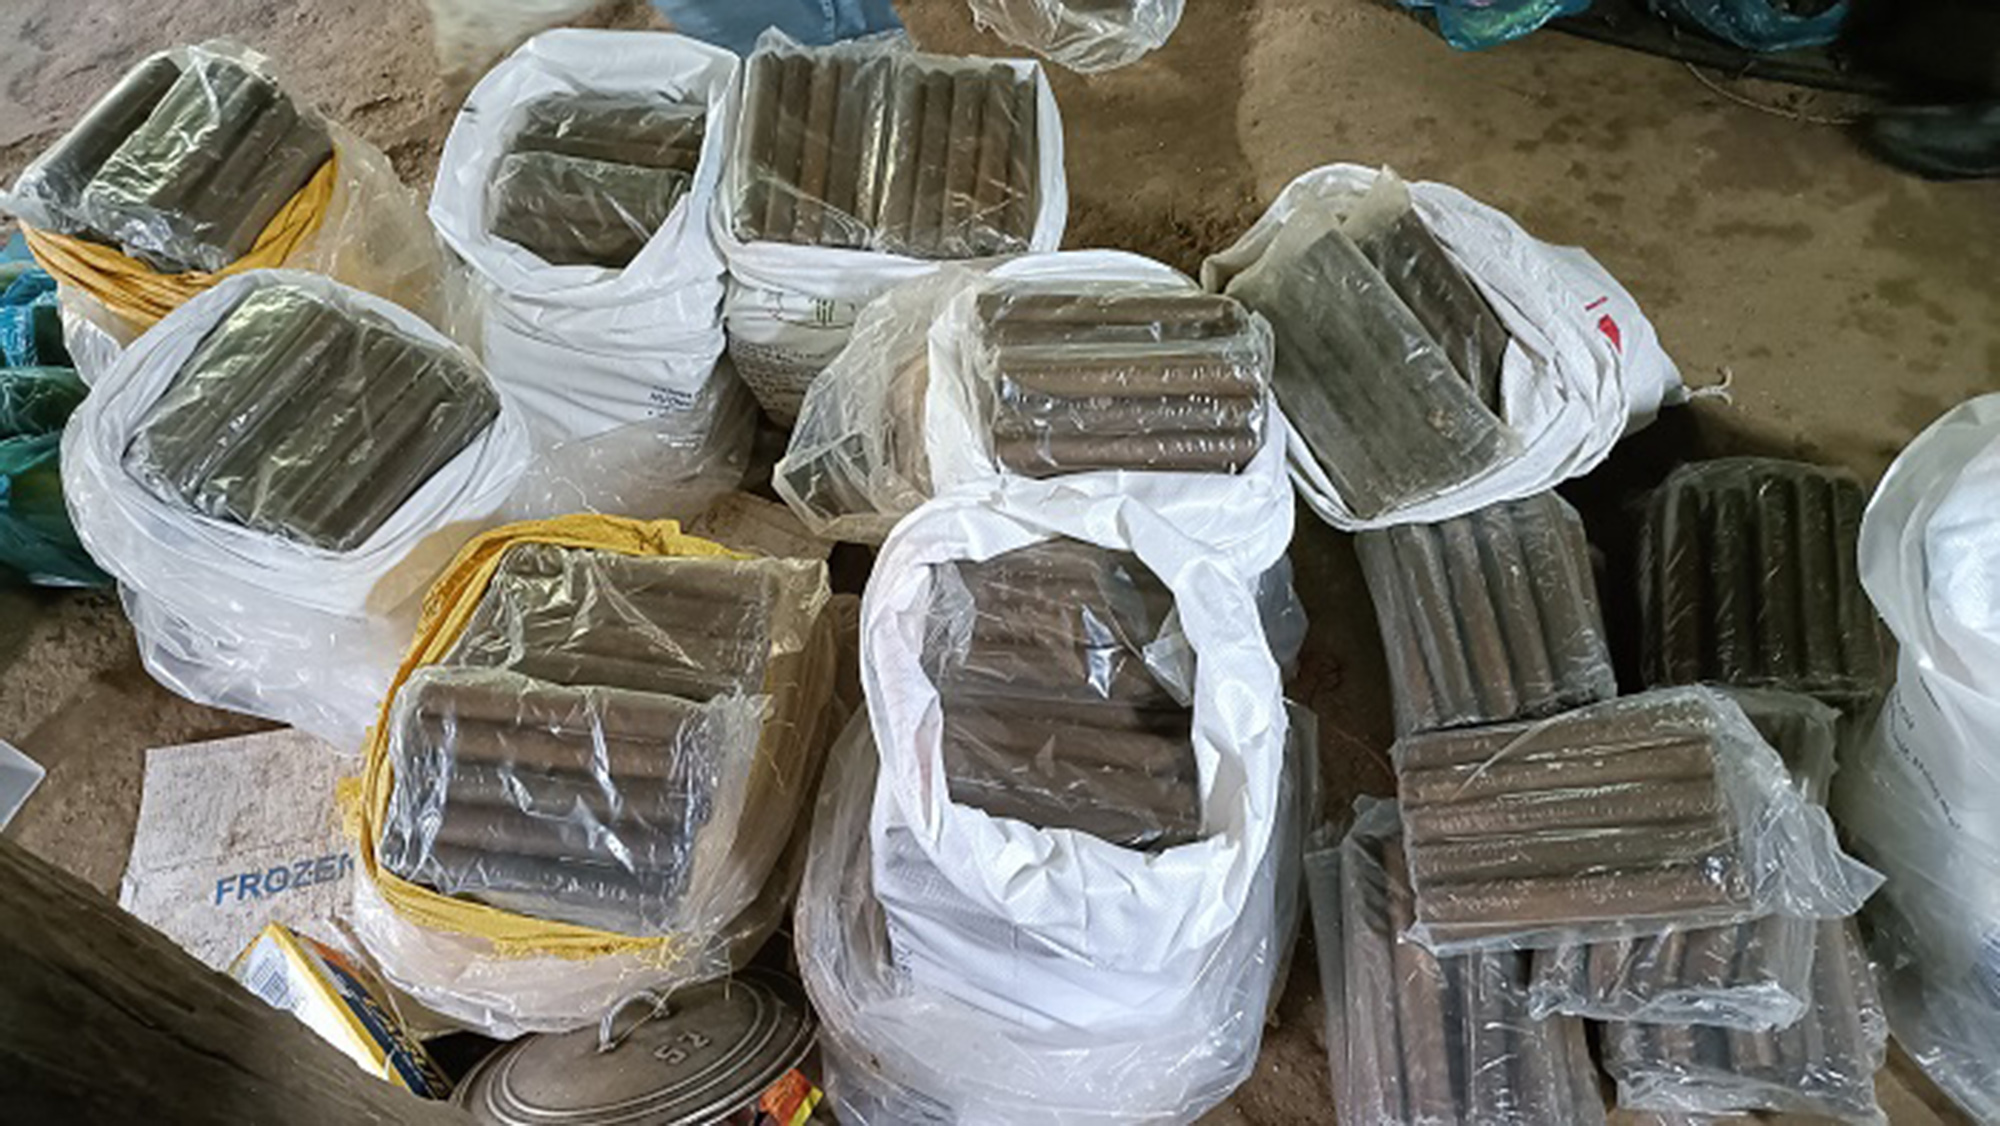 Police break up racket trading nearly 1 metric ton of explosives in central Vietnam